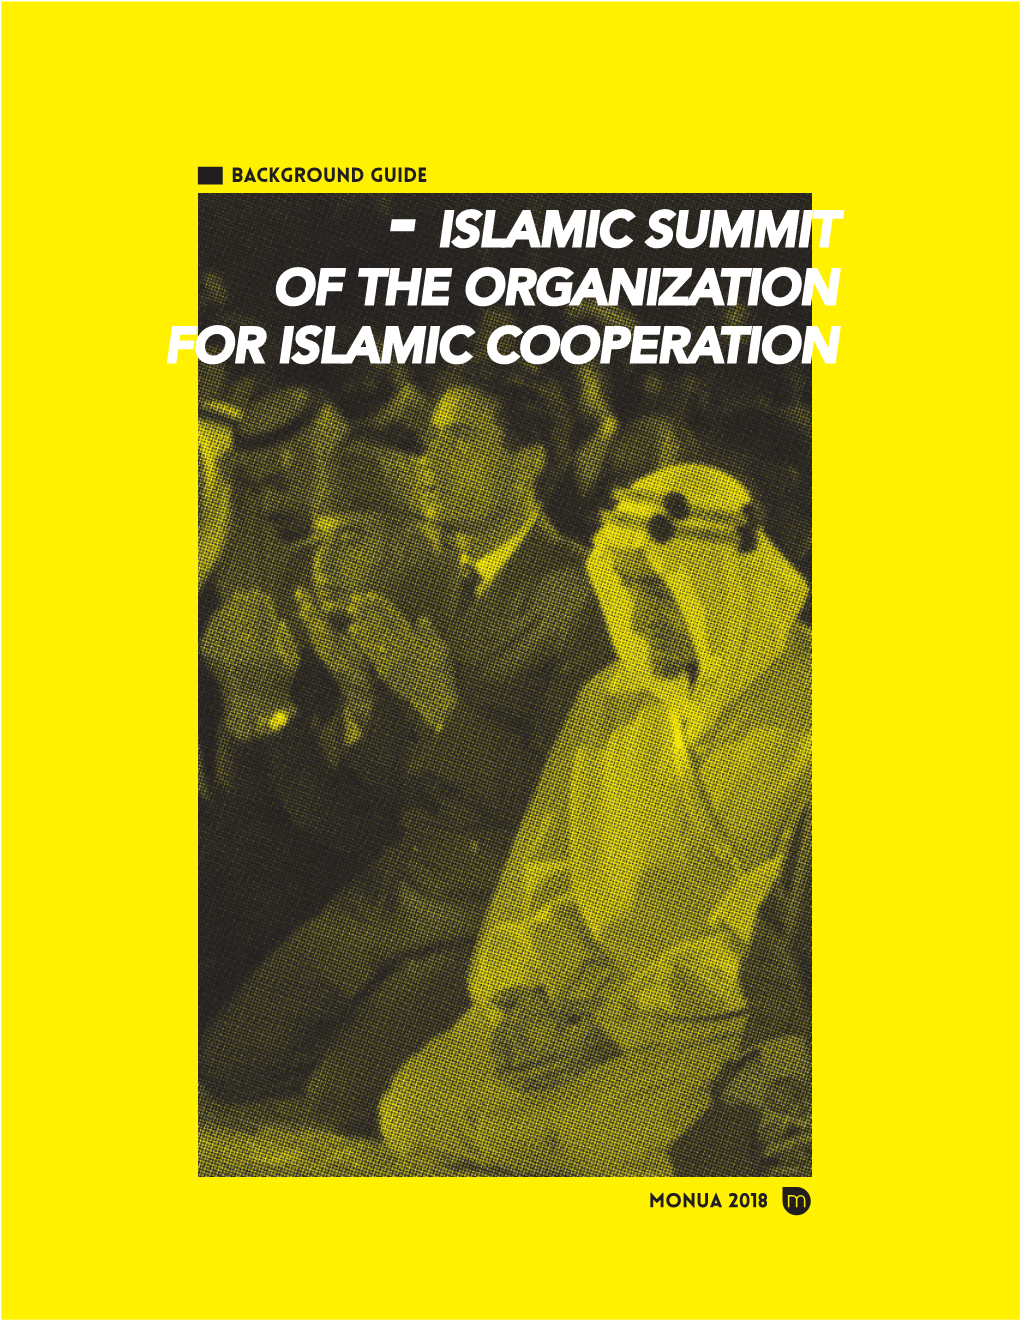 Islamic Summit of the Organization for Islamic Cooperation